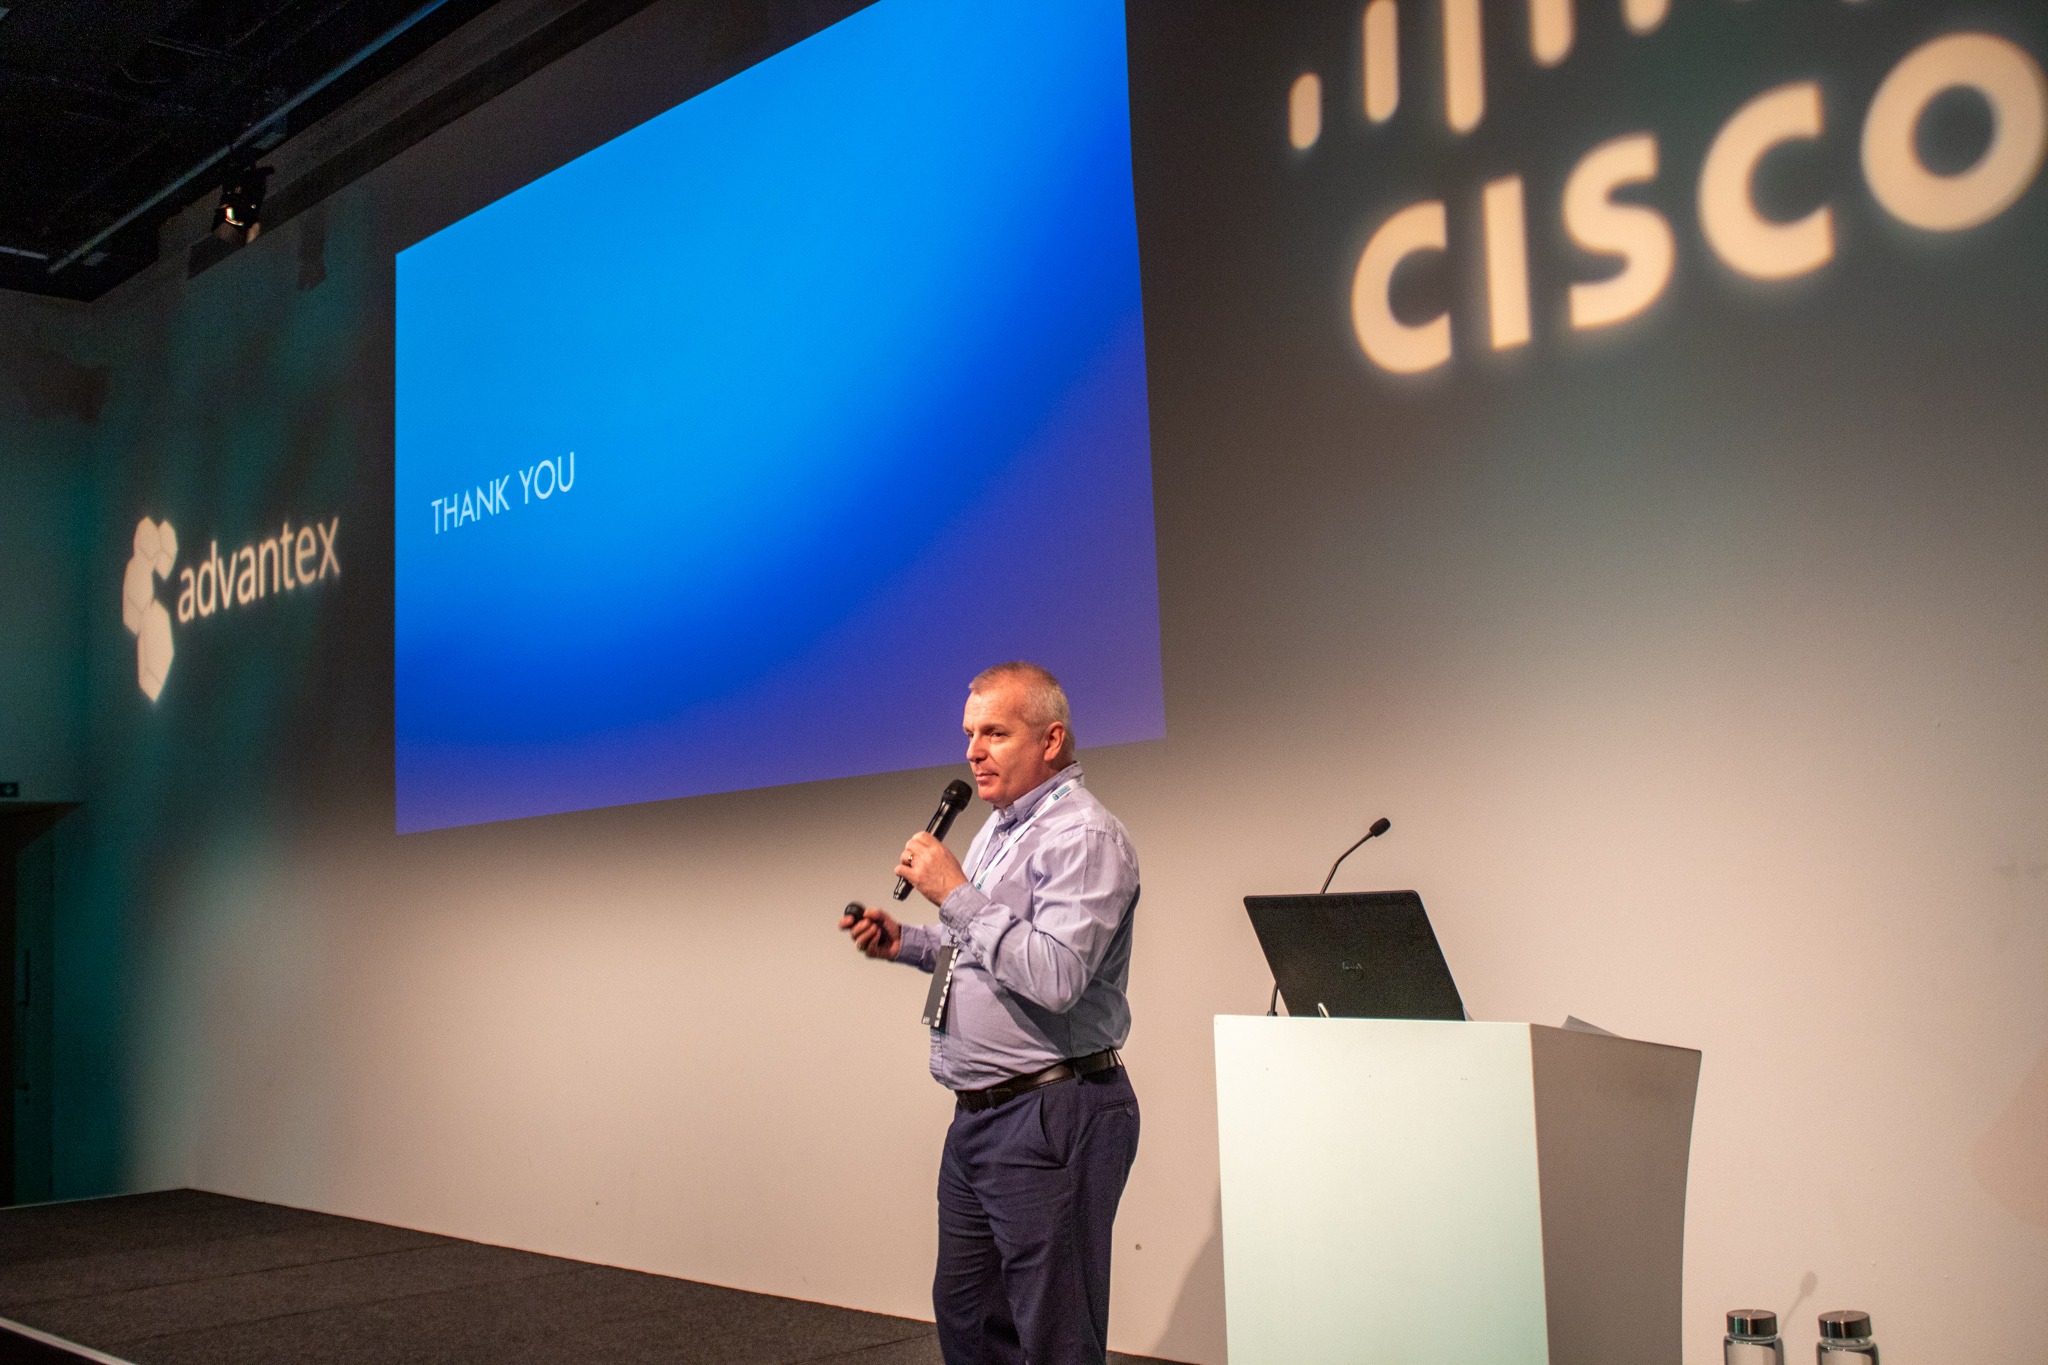 Cisco's Rob Price on stage at the Cybersecurity Summit: North East